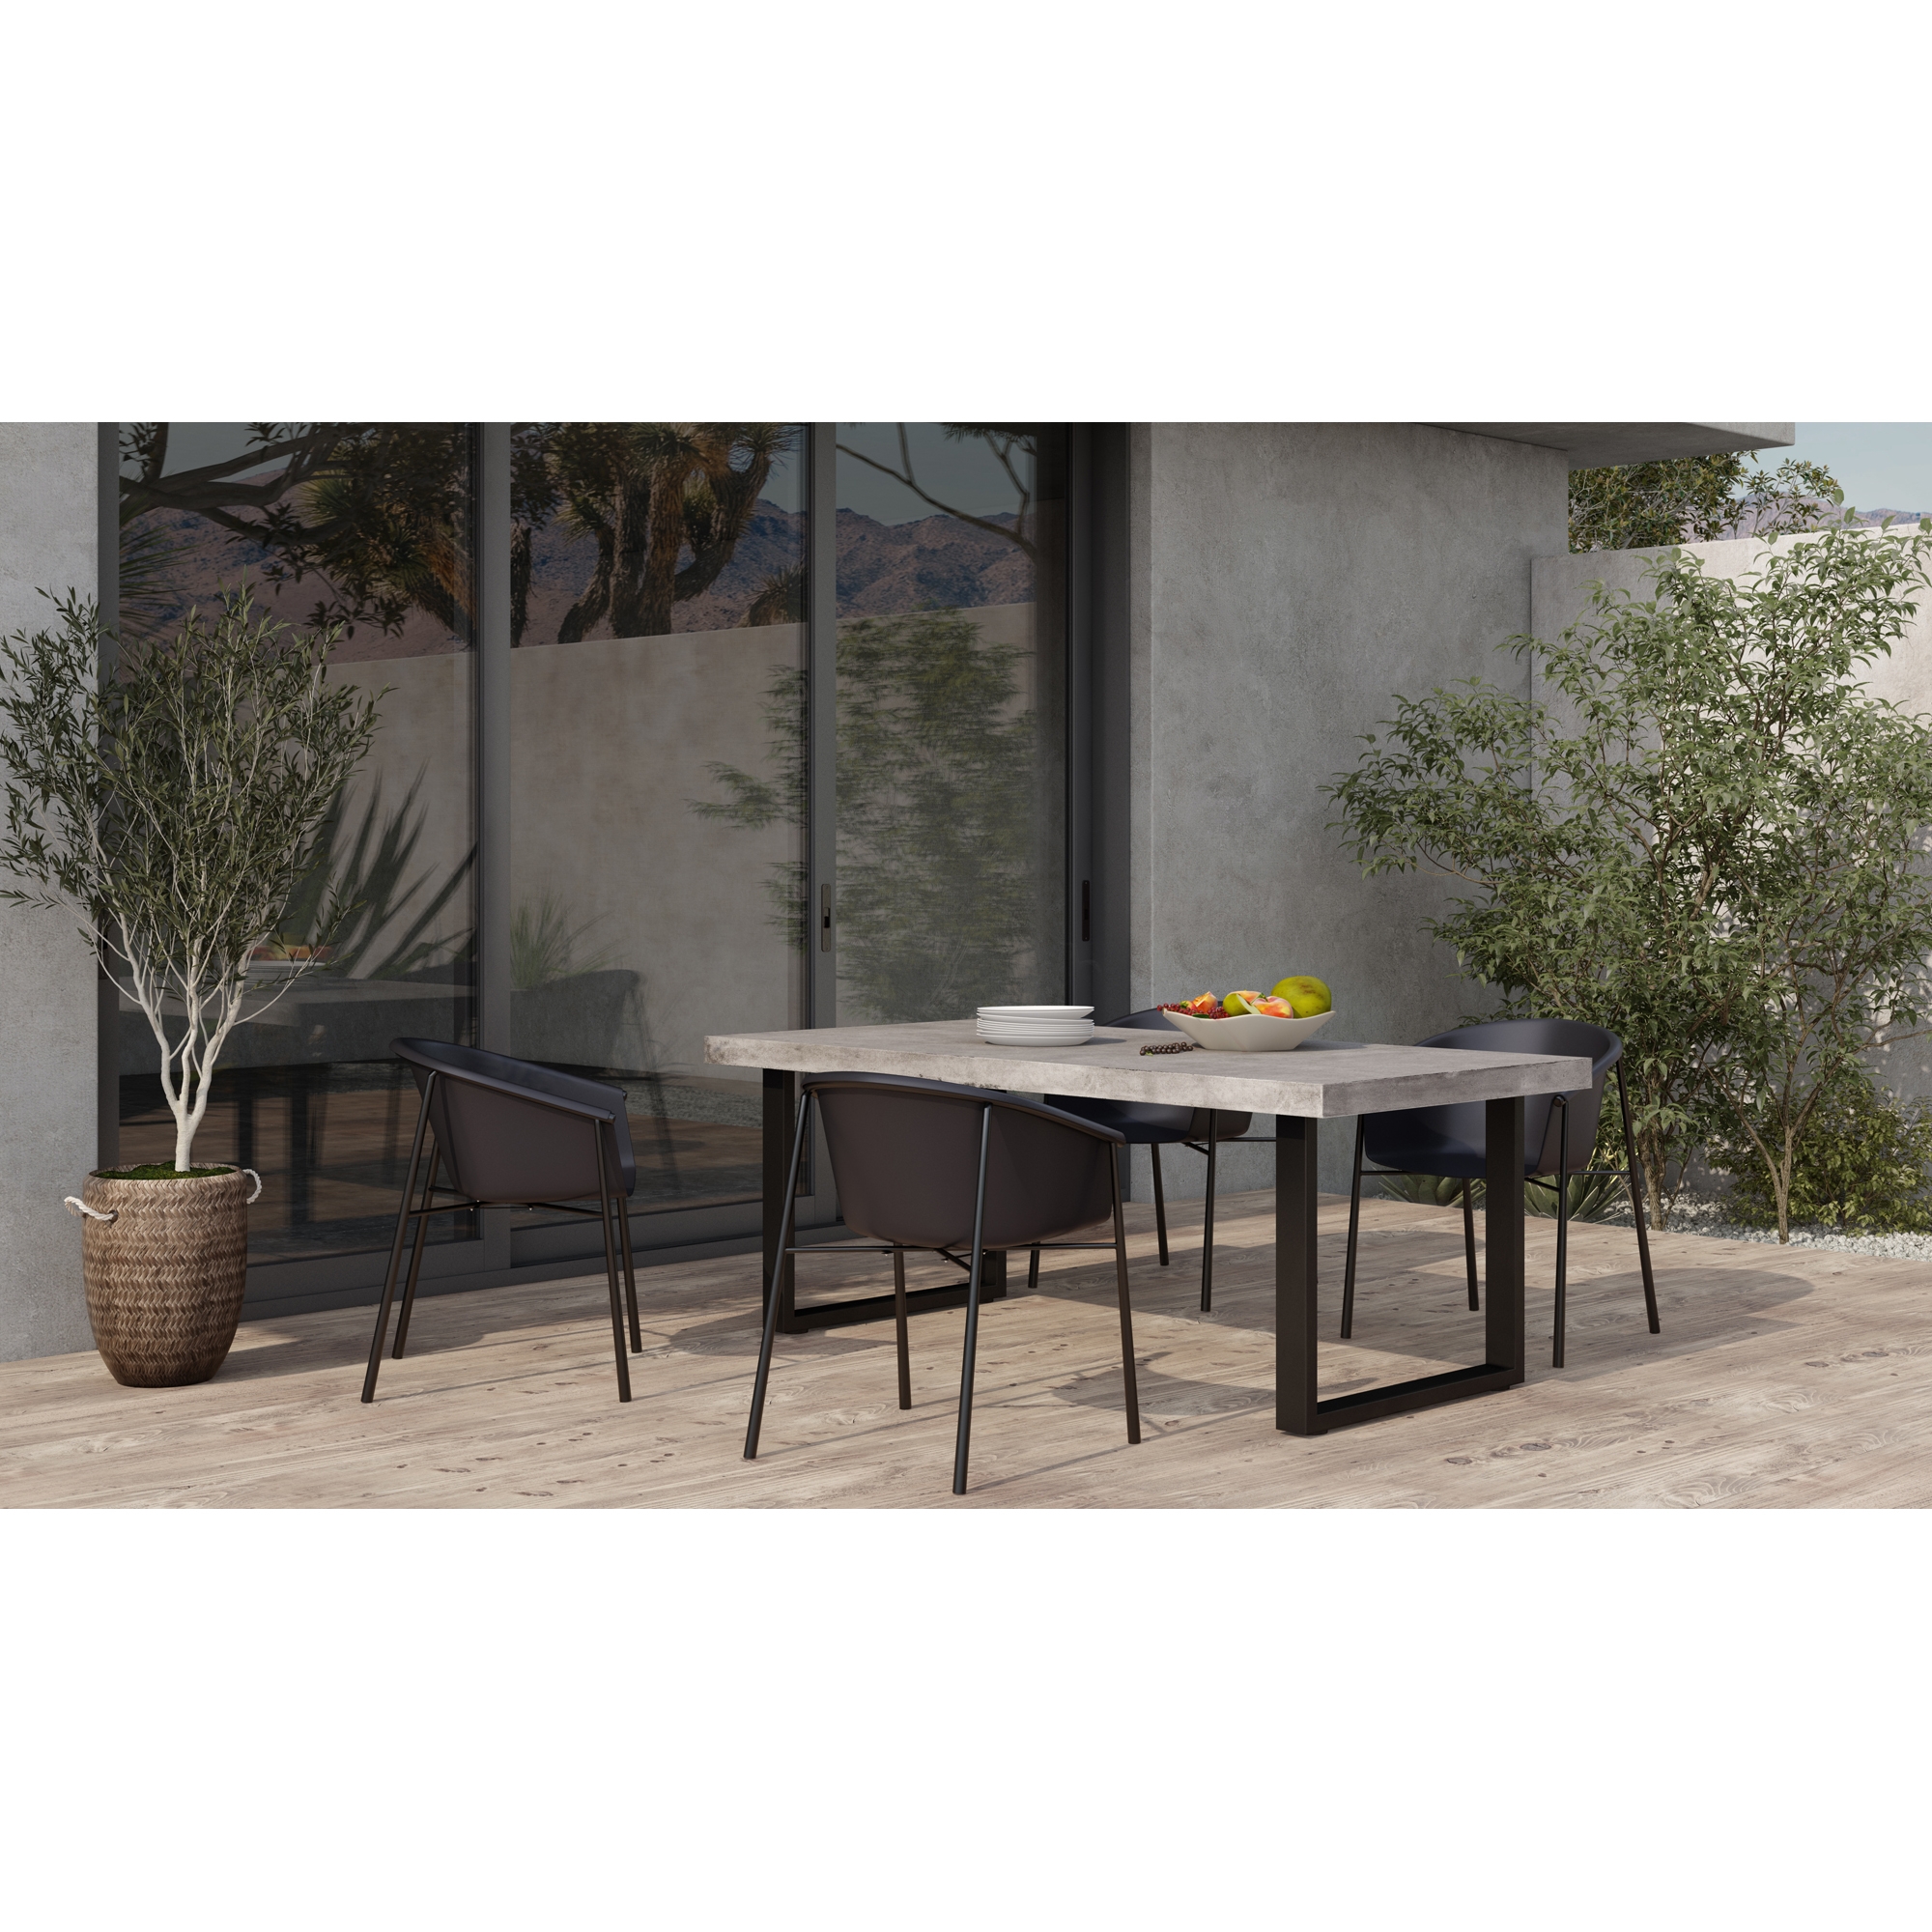 Jedrik Outdoor Dining Table Large - Image 5